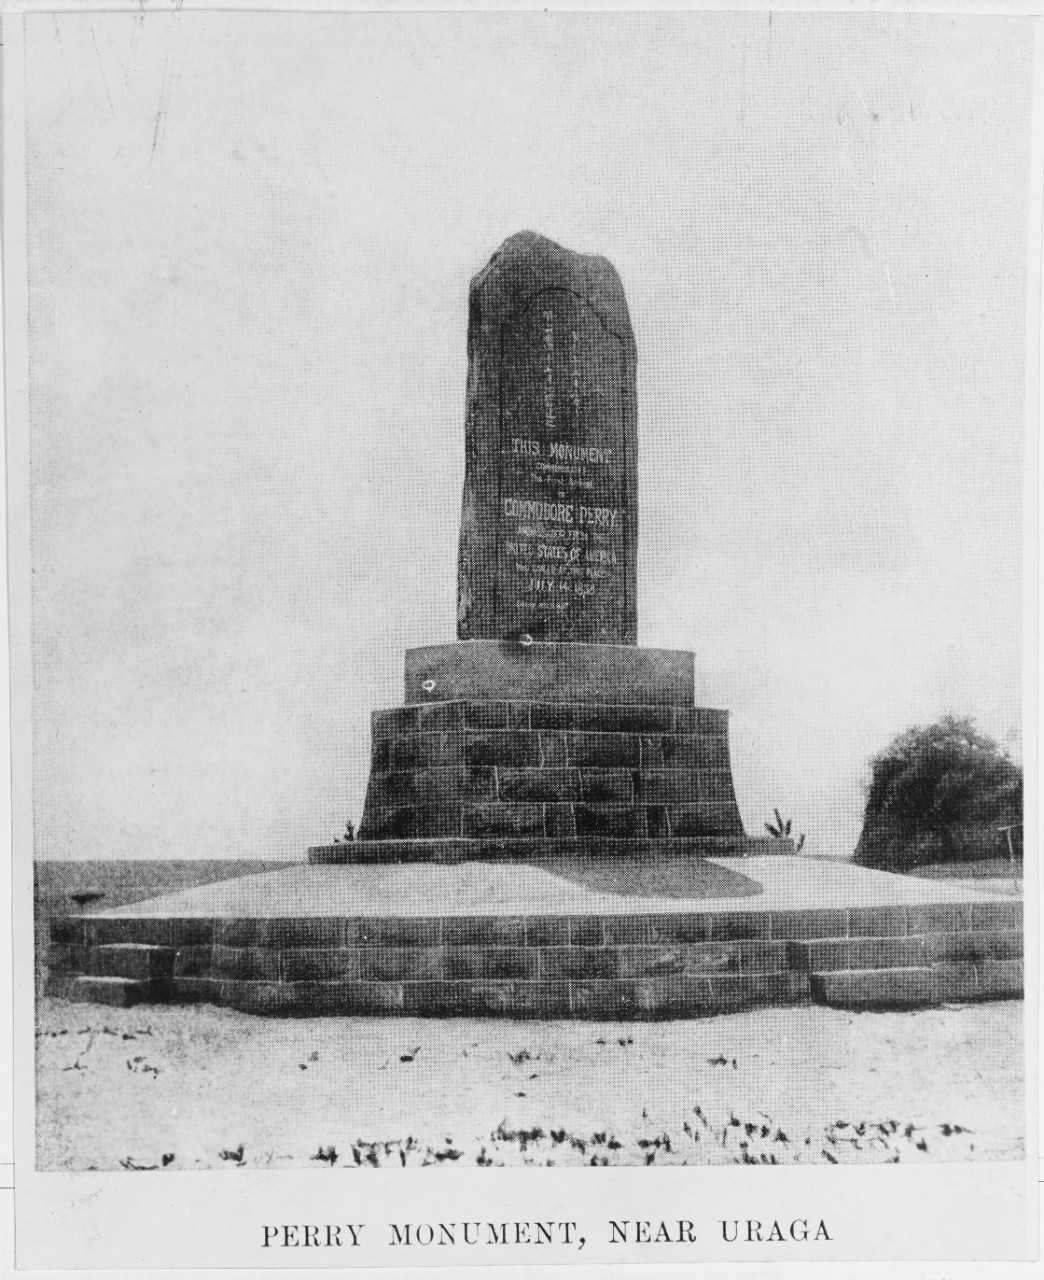 Commodore Perry Monument